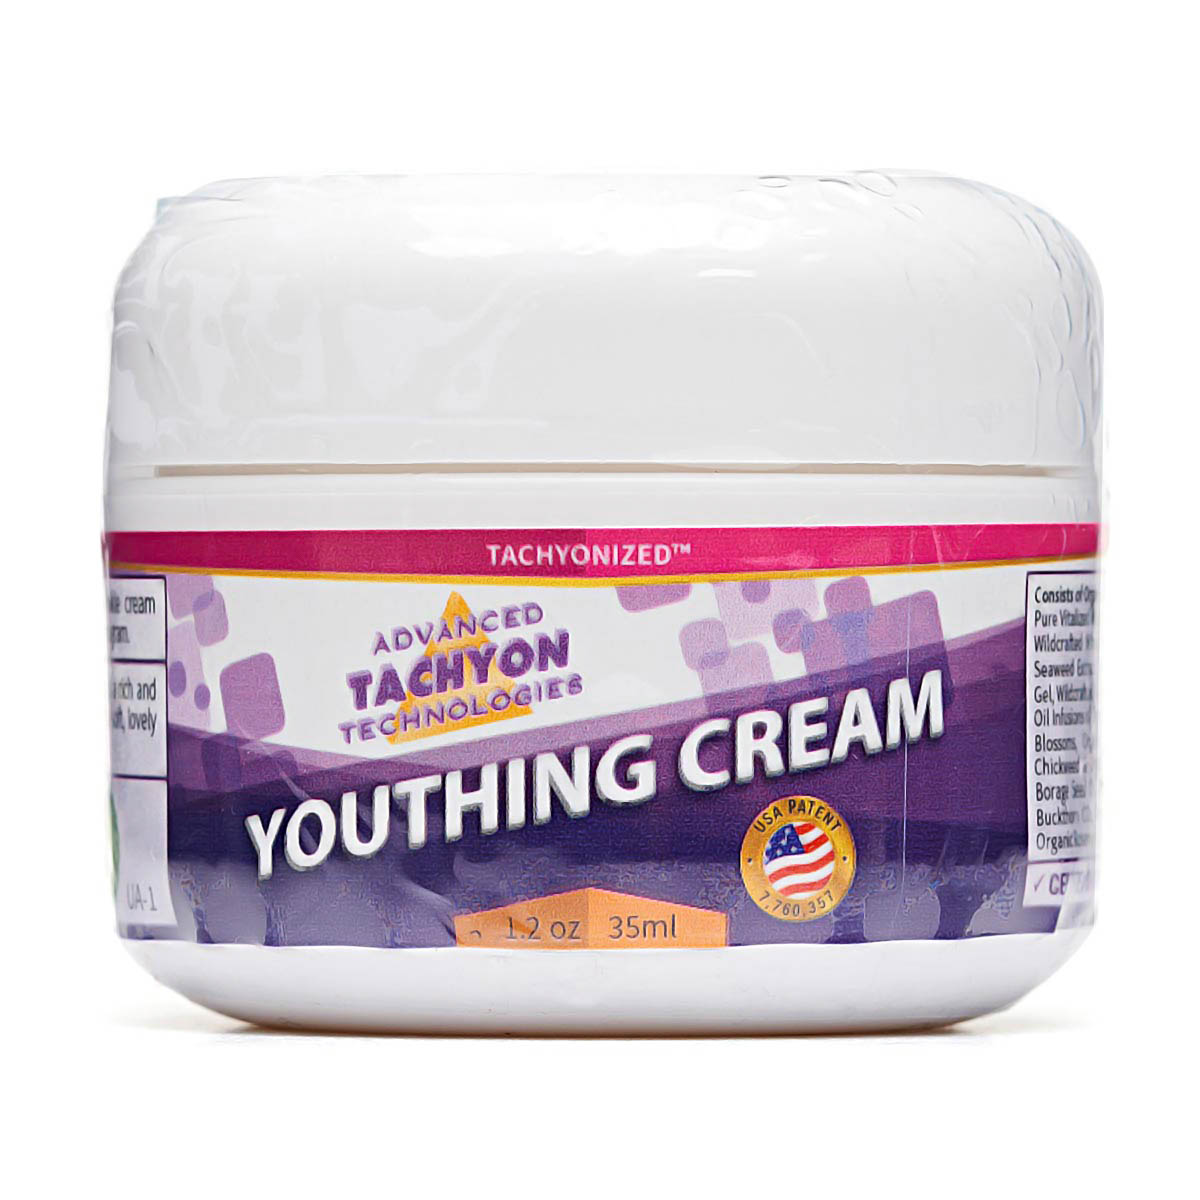 Youthing Cream 35ml | ATT Tachyon | Raw Living UK | Skin Care &amp; Beauty | Advanced Tachyon Technologies Tachyonized Youthing Wrinkle Cream is packed with Vitamins &amp; will leave your skin Moisturised, Smooth, Protected &amp; Regenerated